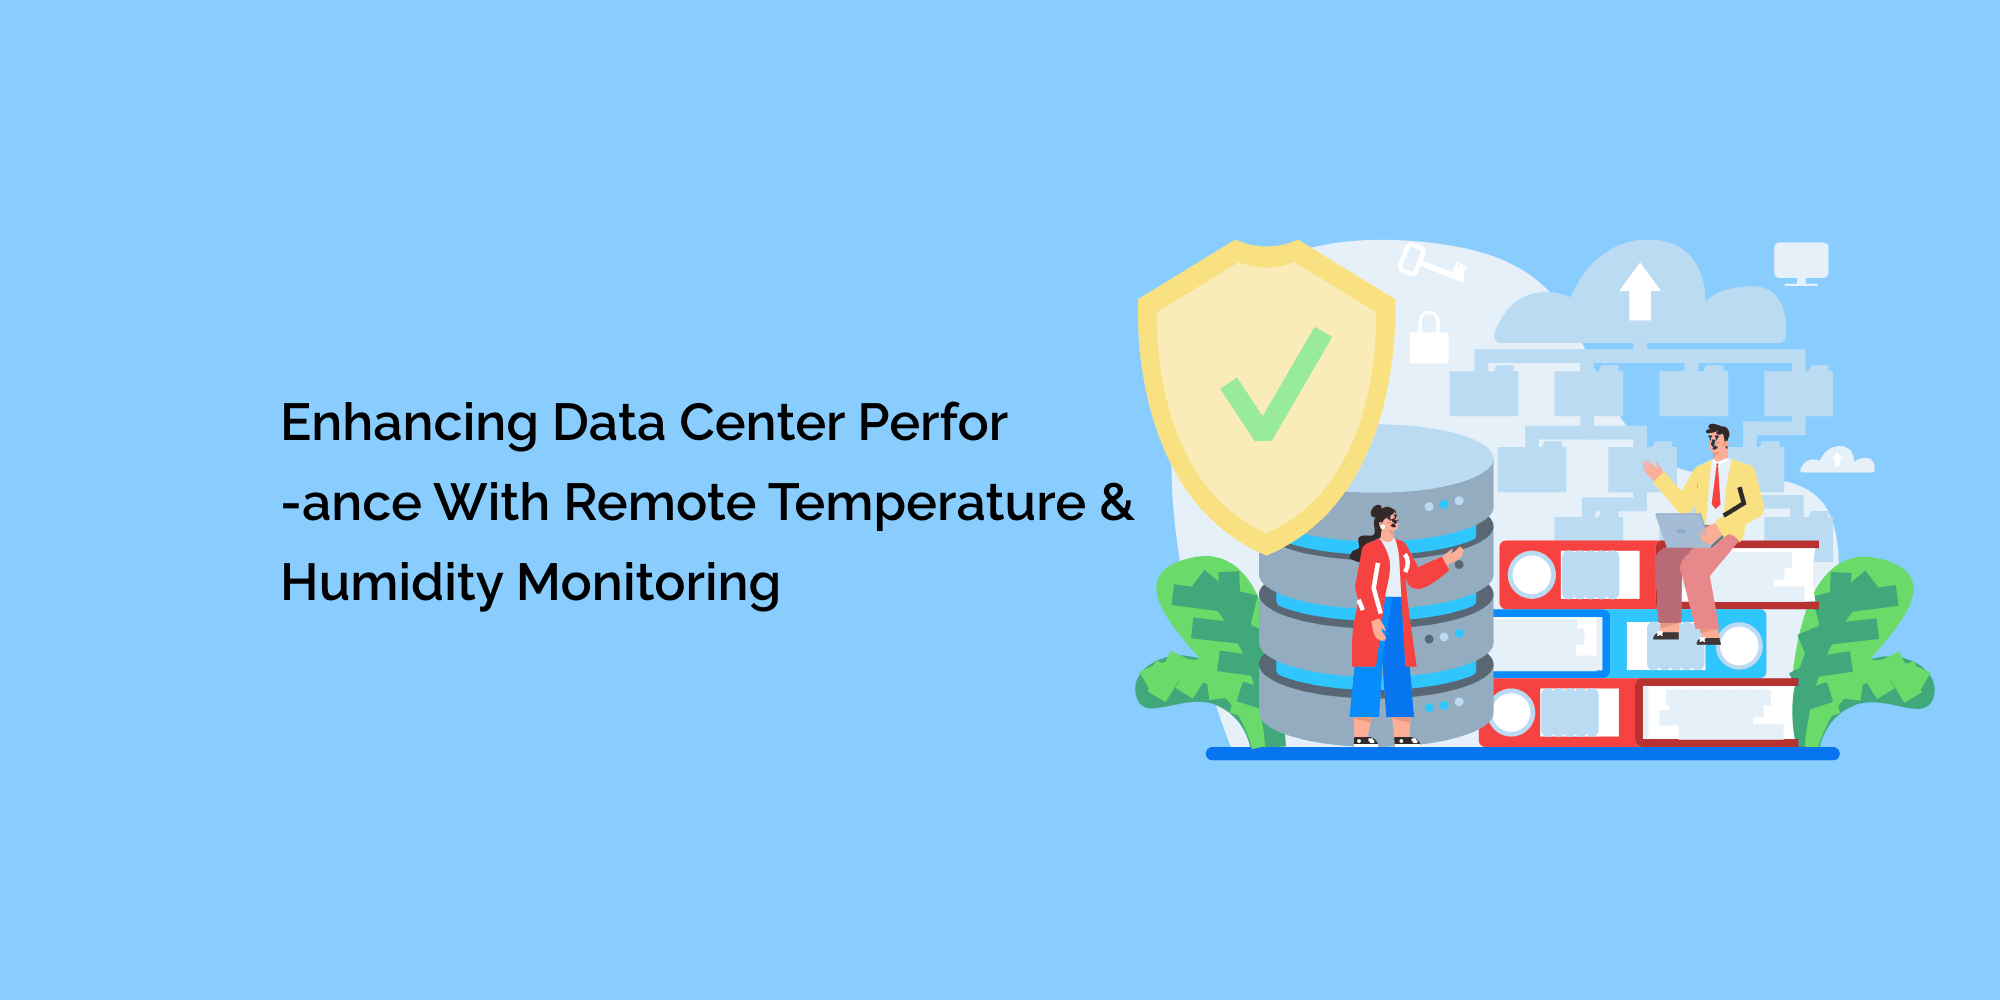 Enhancing Data Center Performance with Remote Temperature and Humidity Monitoring